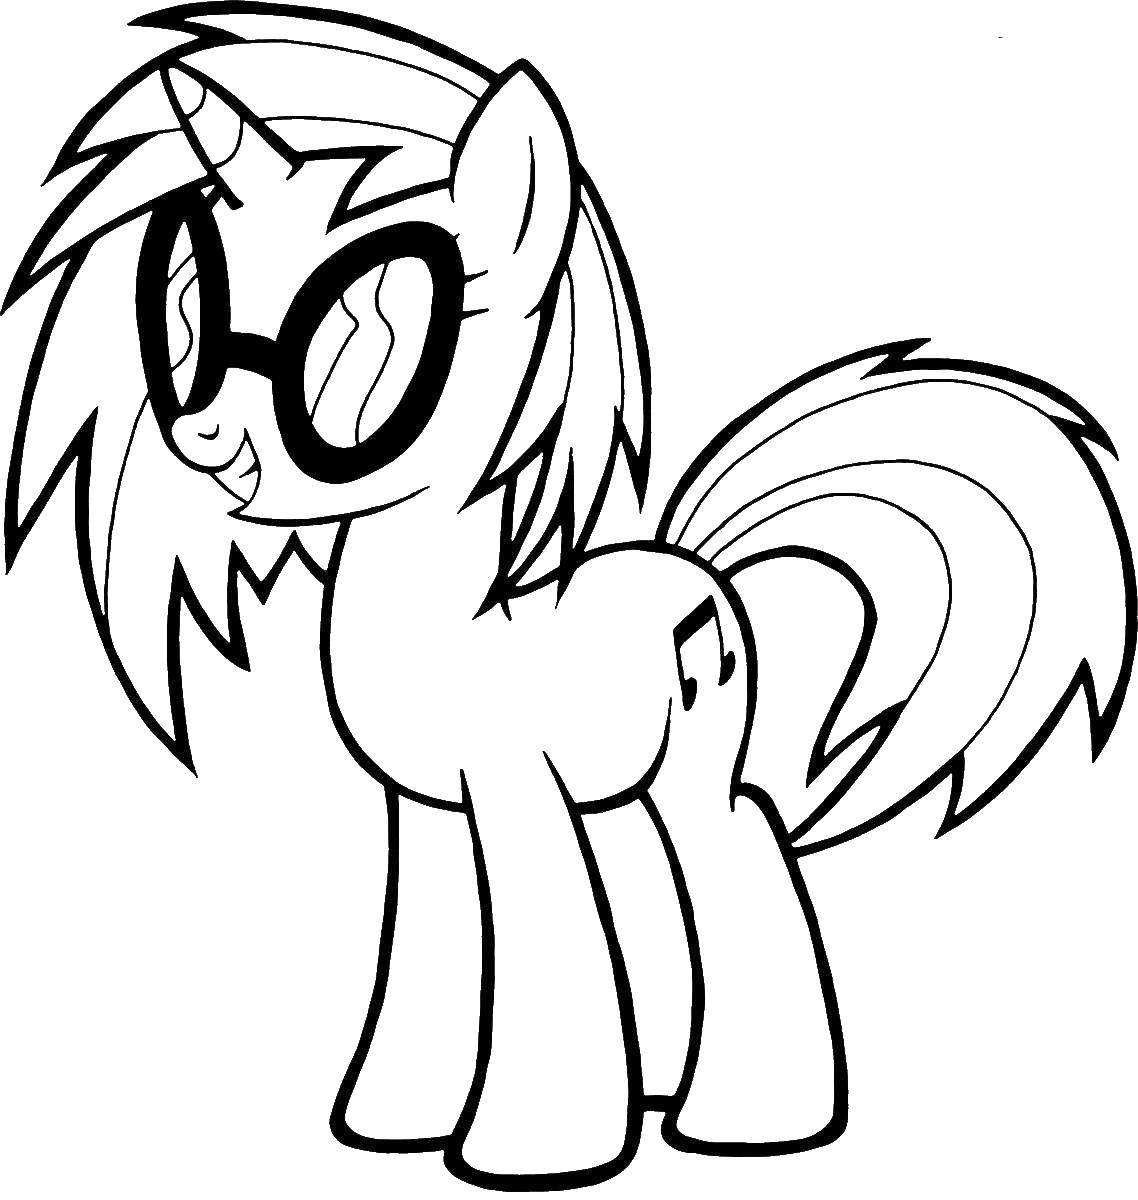 Coloring Ponies with glasses. Category Ponies. Tags:  Pony, My little pony.